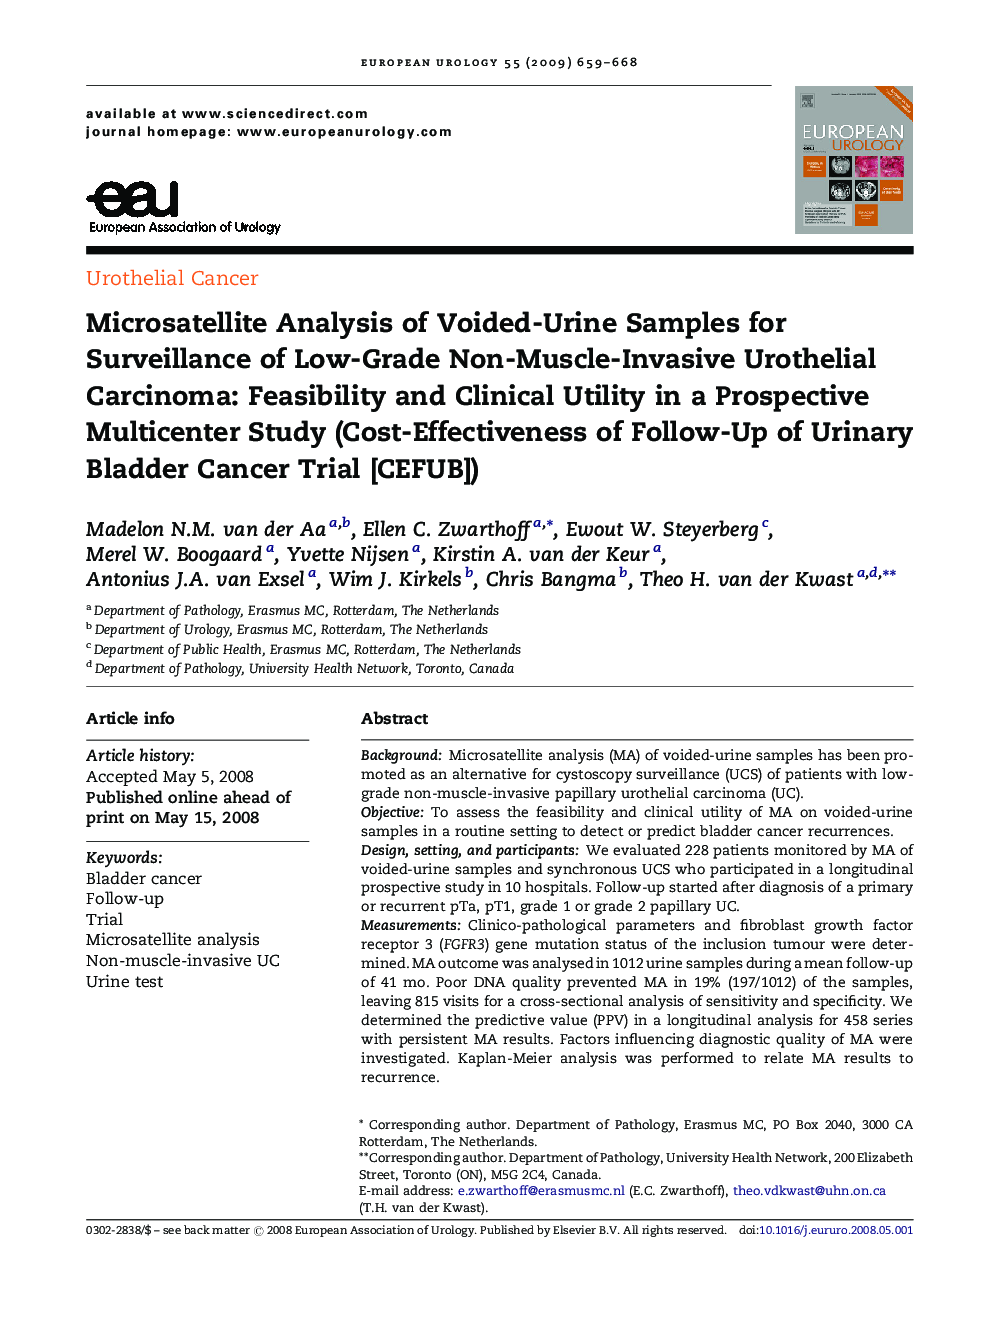 Microsatellite Analysis of Voided-Urine Samples for Surveillance of Low-Grade Non-Muscle-Invasive Urothelial Carcinoma: Feasibility and Clinical Utility in a Prospective Multicenter Study (Cost-Effectiveness of Follow-Up of Urinary Bladder Cancer Trial [C